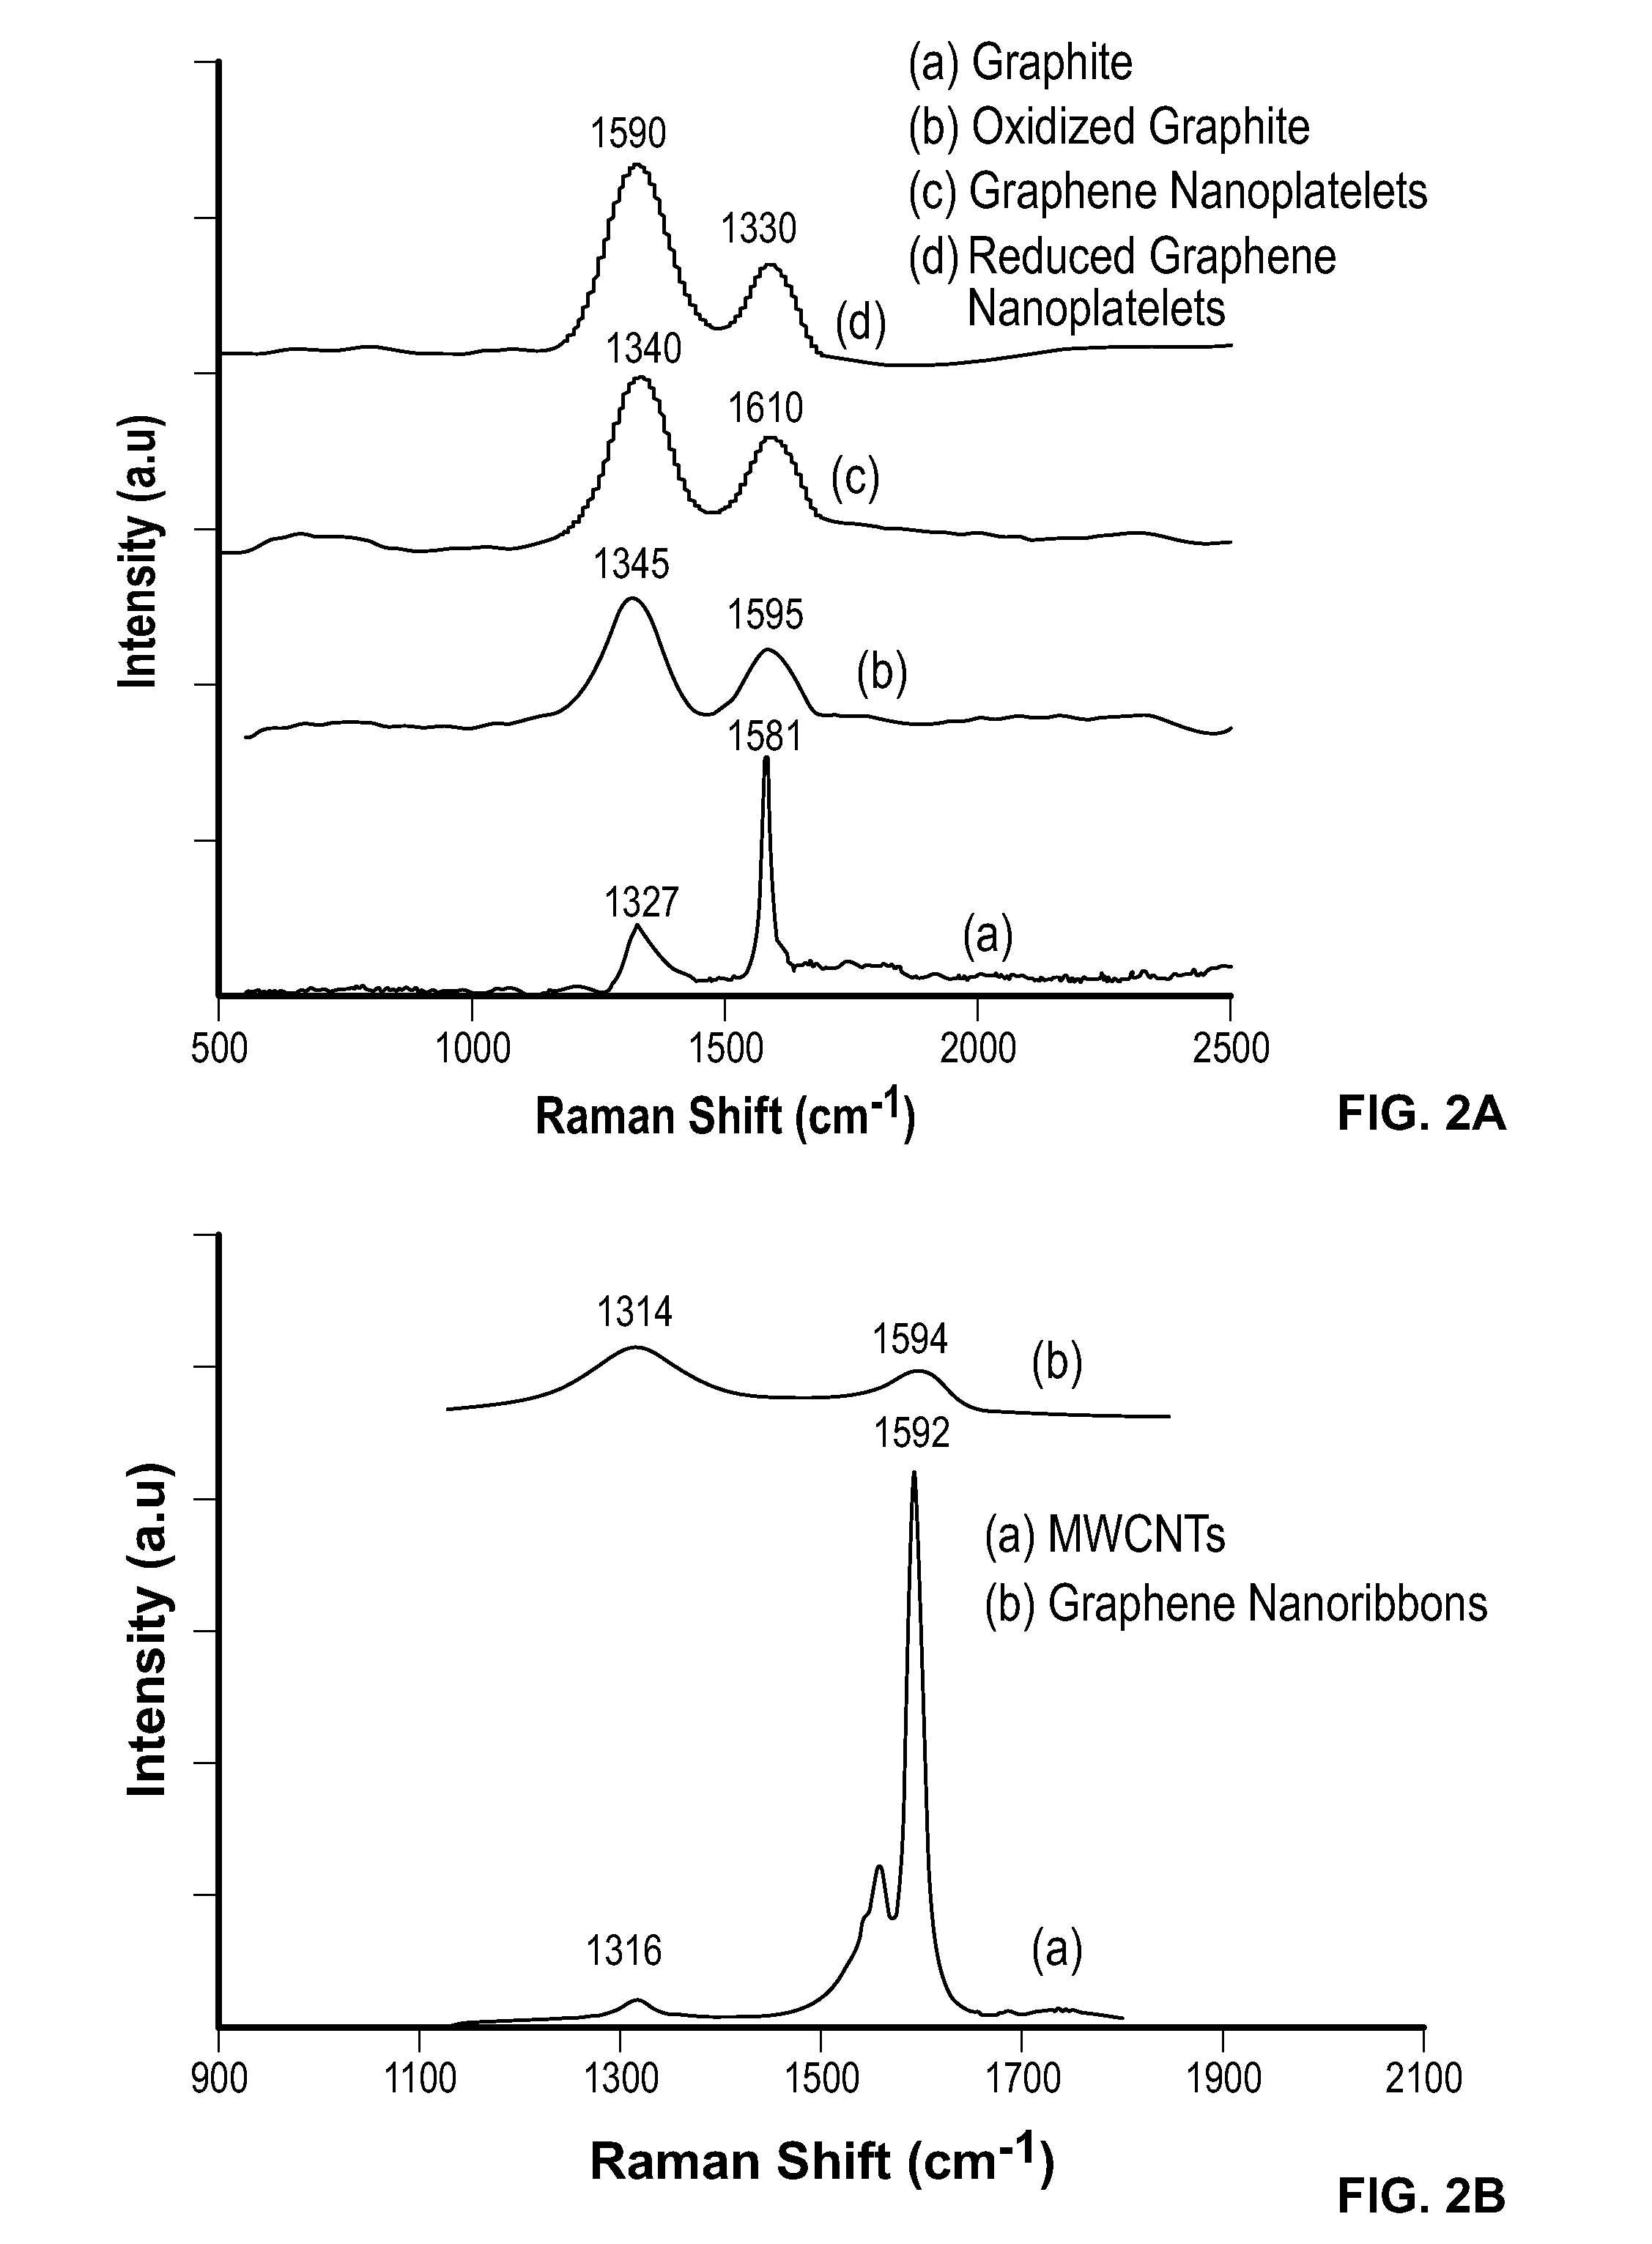 Magnetic graphene-like nanoparticles or graphitic nano- or microparticles and method of production and uses thereof